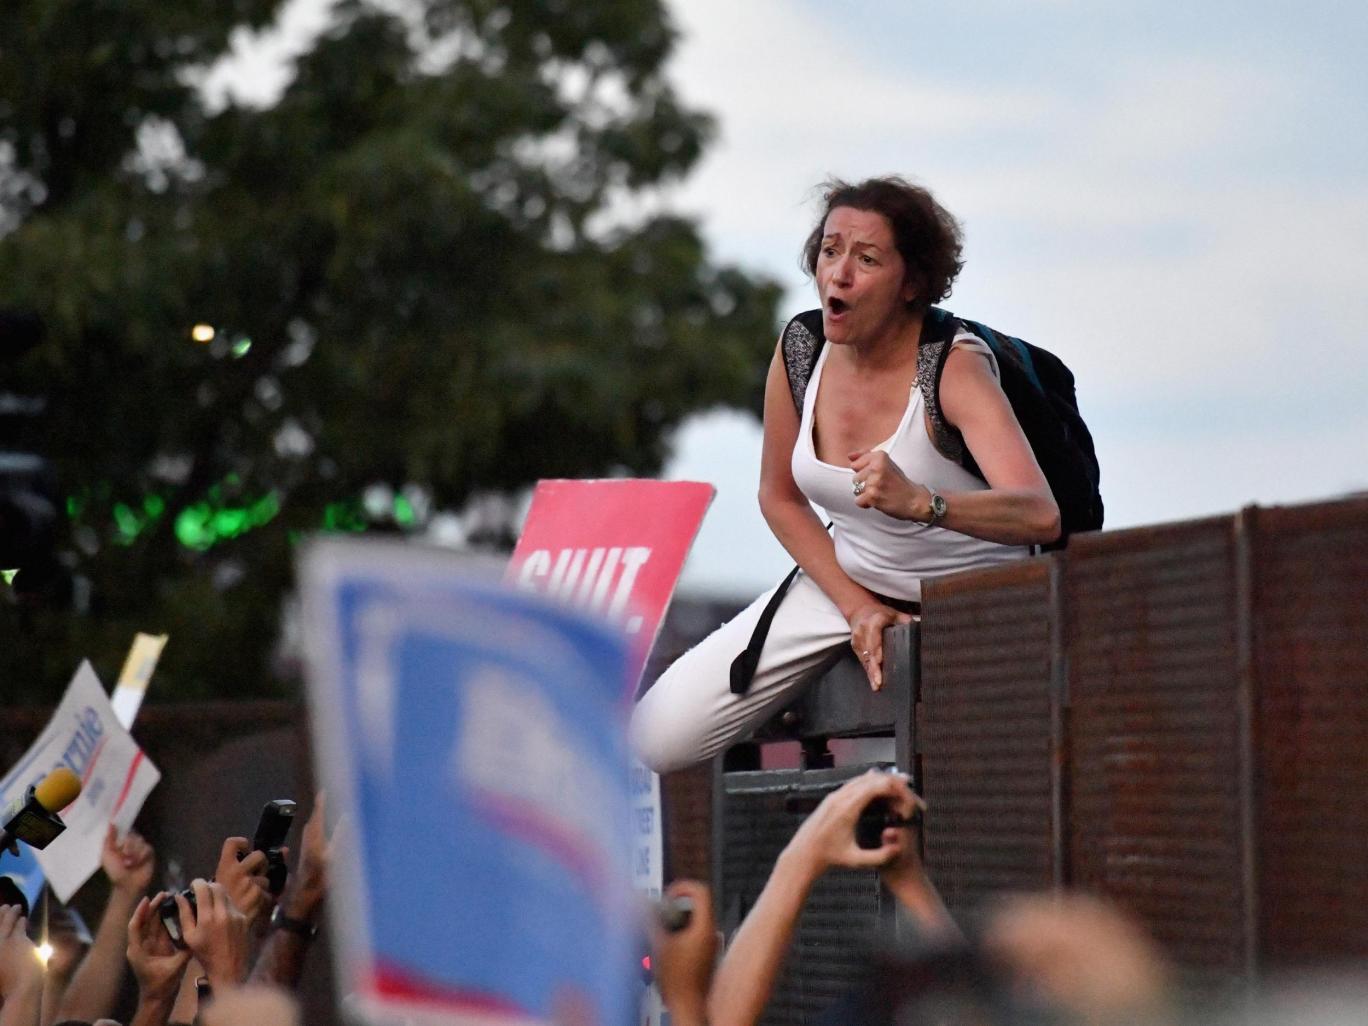 DNC 2016 protests: Seven arrested for breaching security fence at Democrats convention